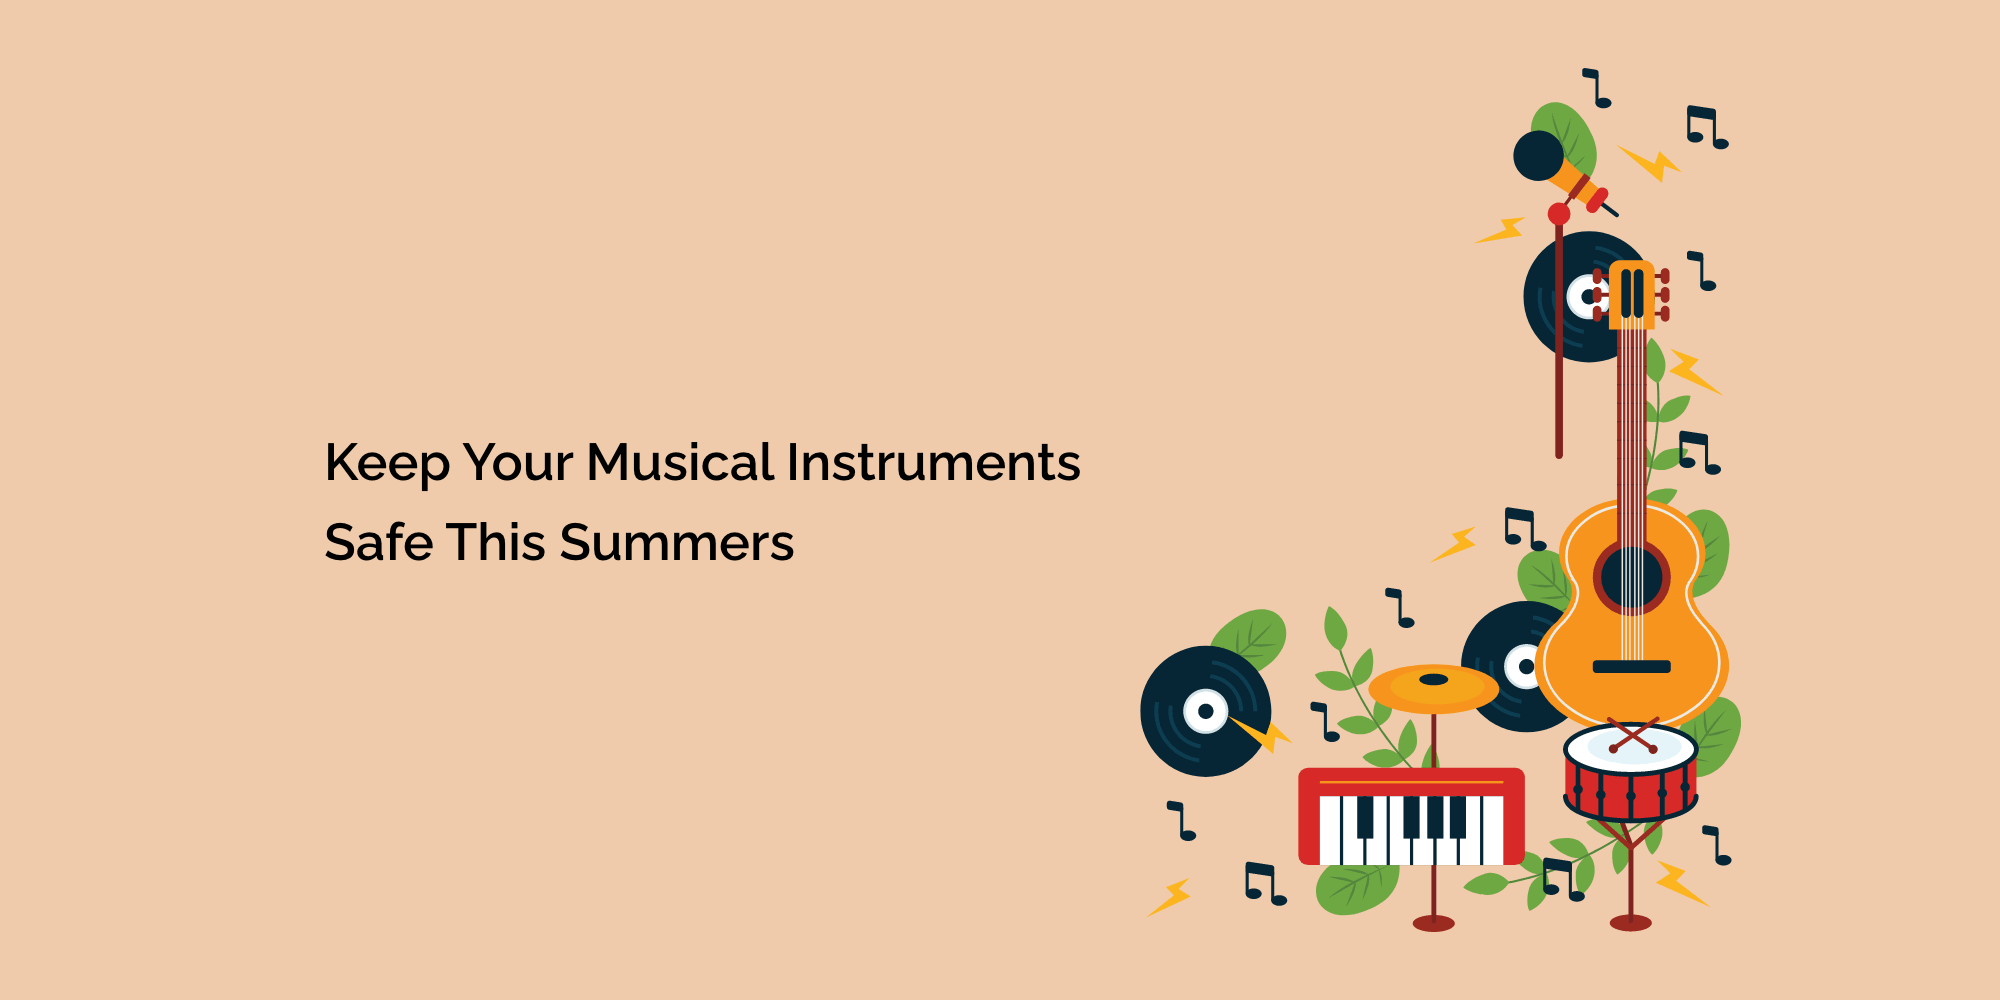 Keep your musical instruments safe this summers